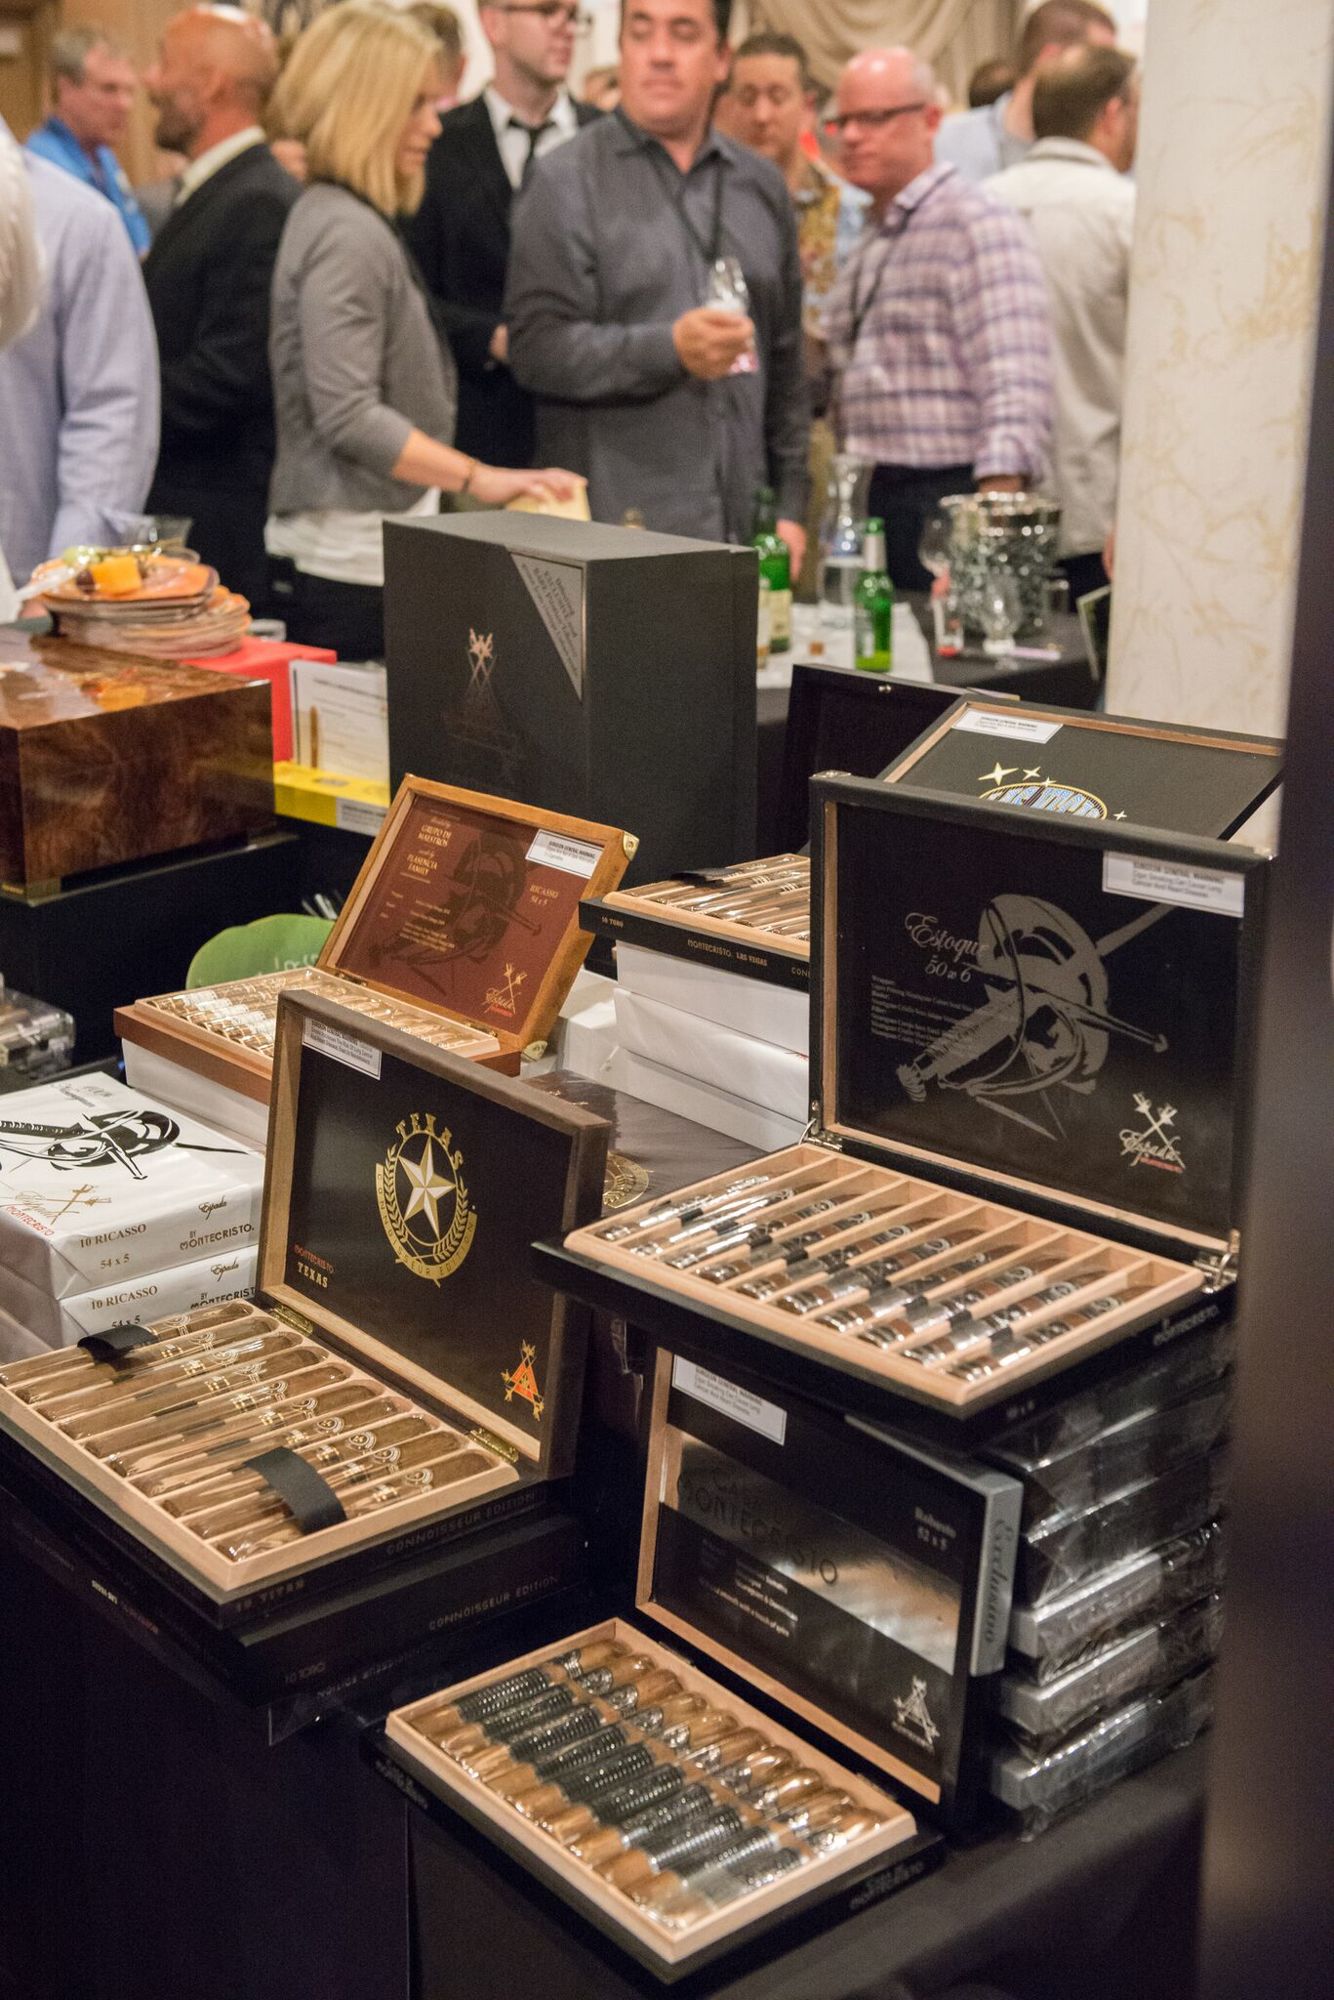 Cigars are also a popular item sold at the festival. Courtesy photo